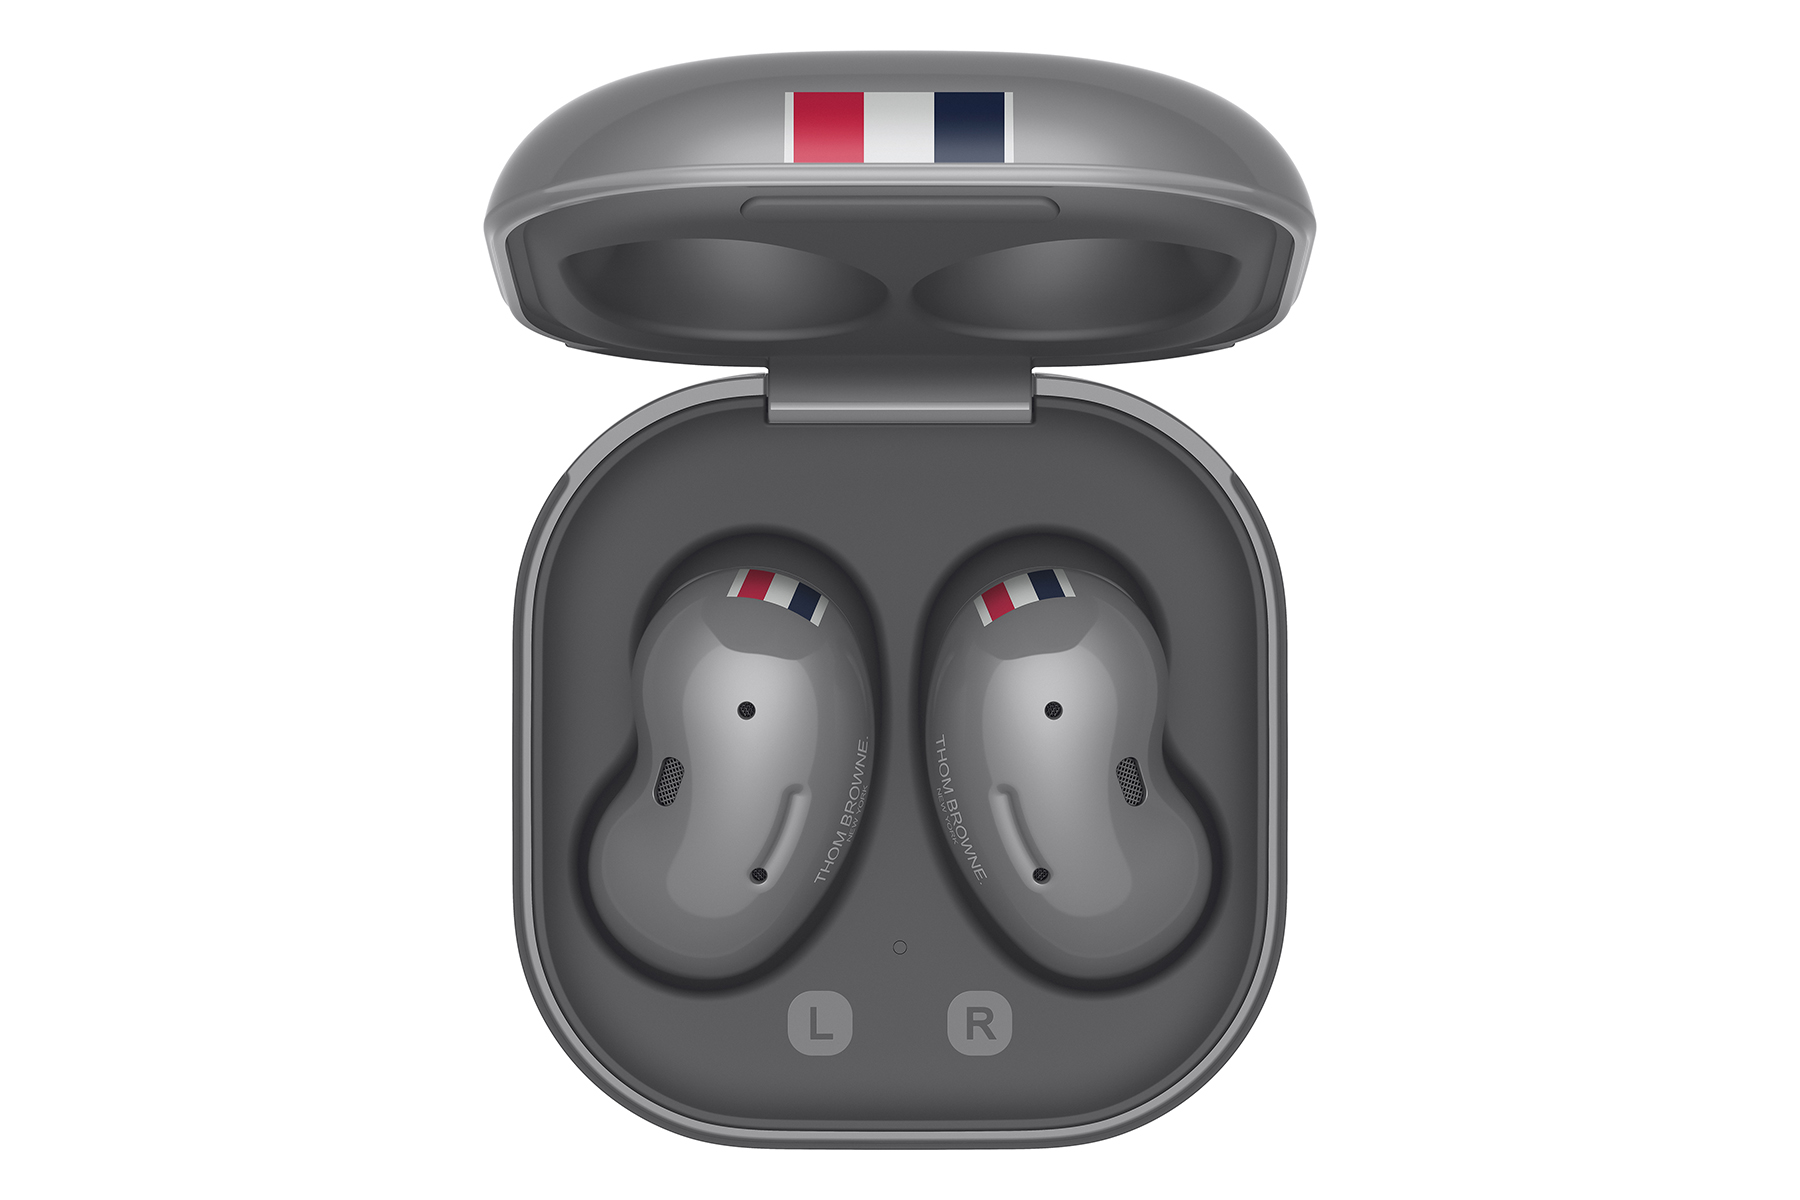 Galaxy Buds Live Thom Browne Edition in case, top view.